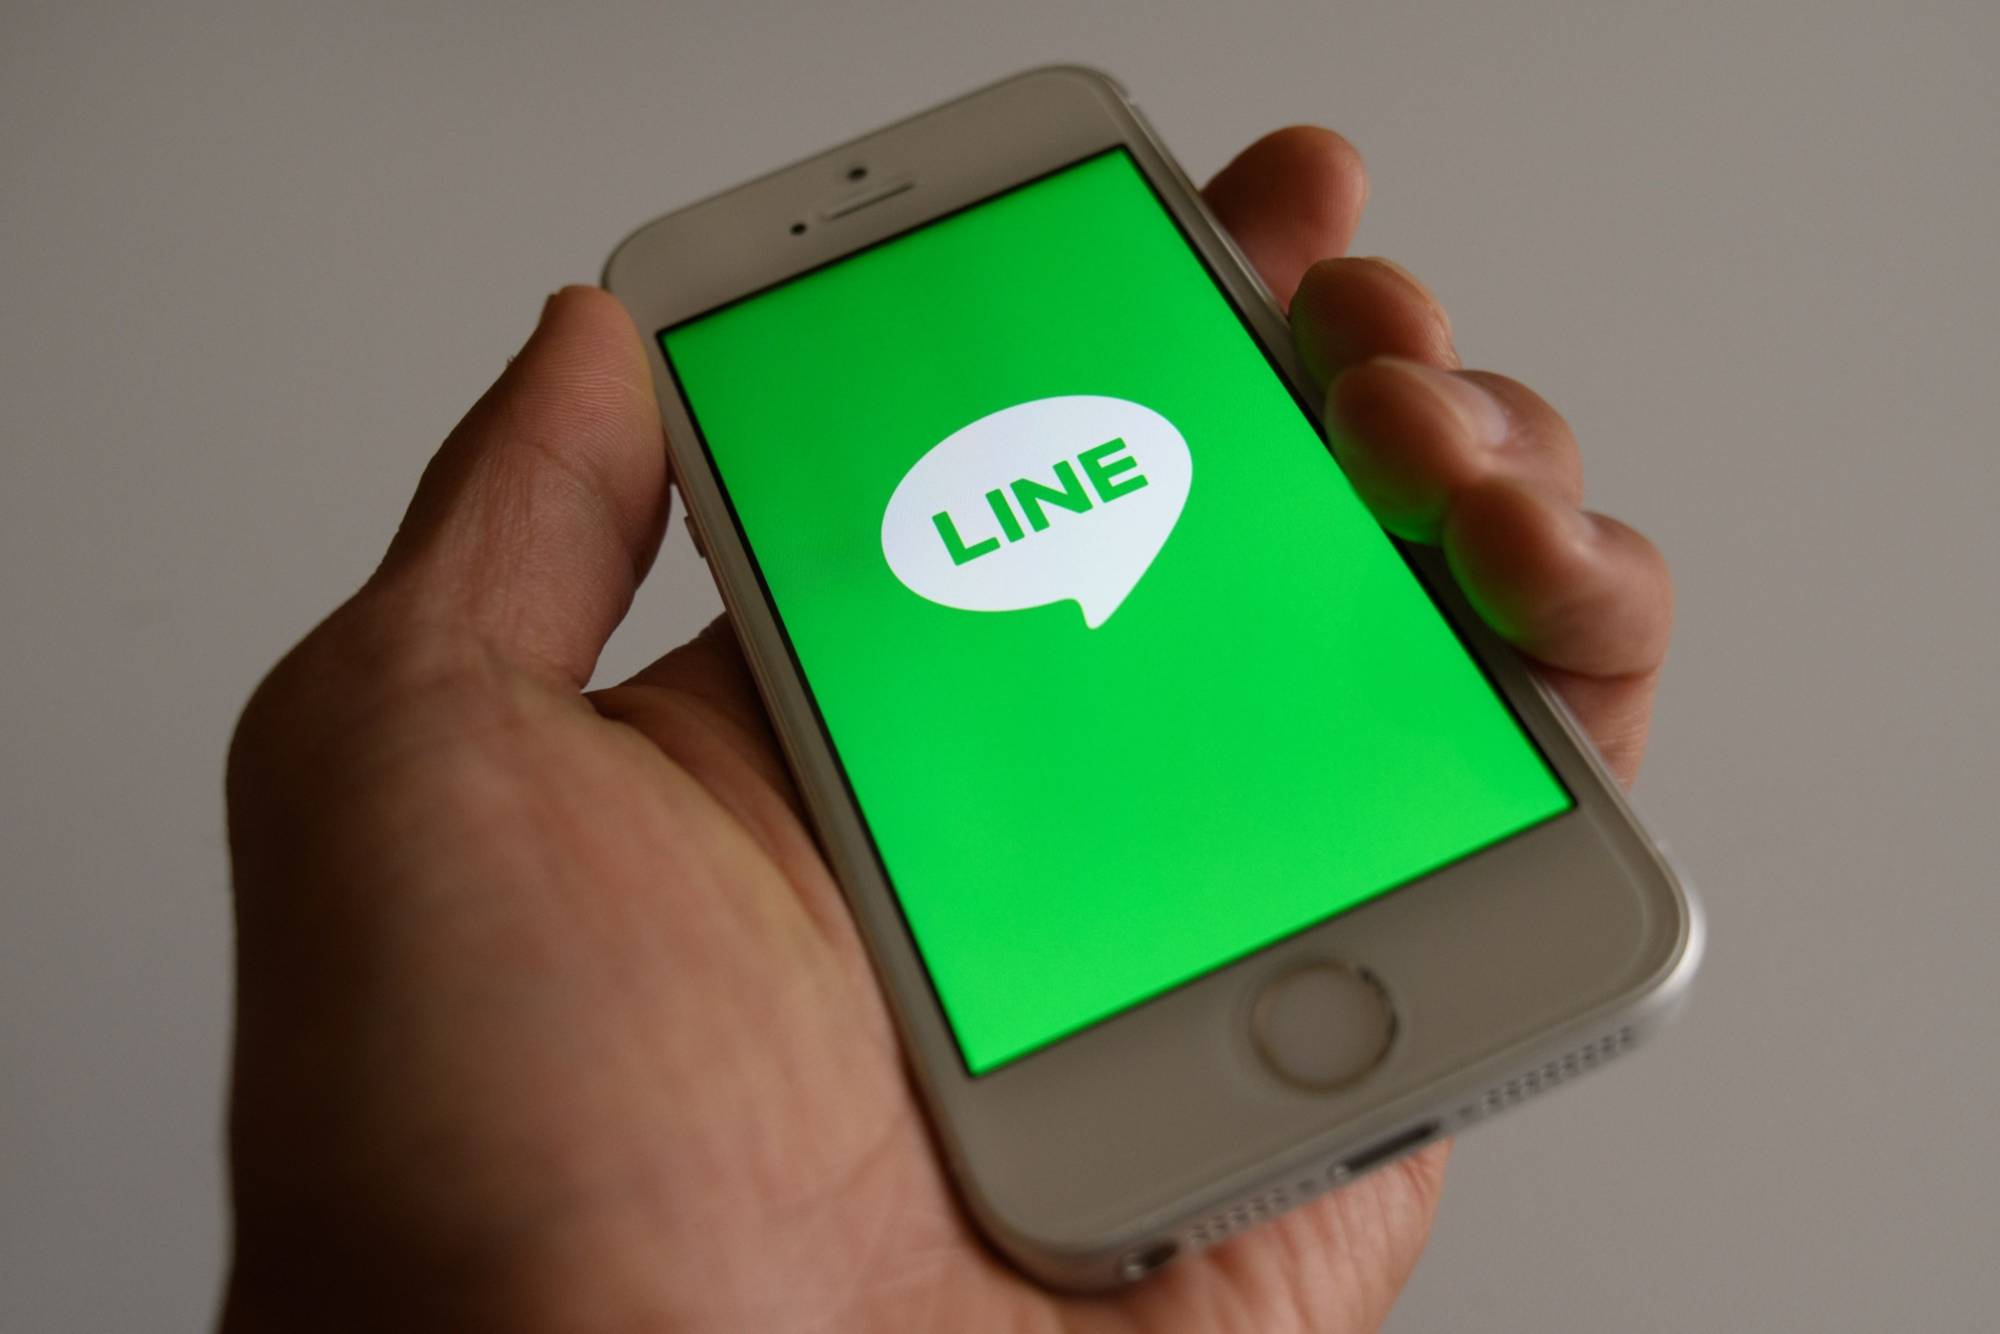 Line Corp. has been ordered by the government to take measures to properly protect customers' information. | BLOOMBERG